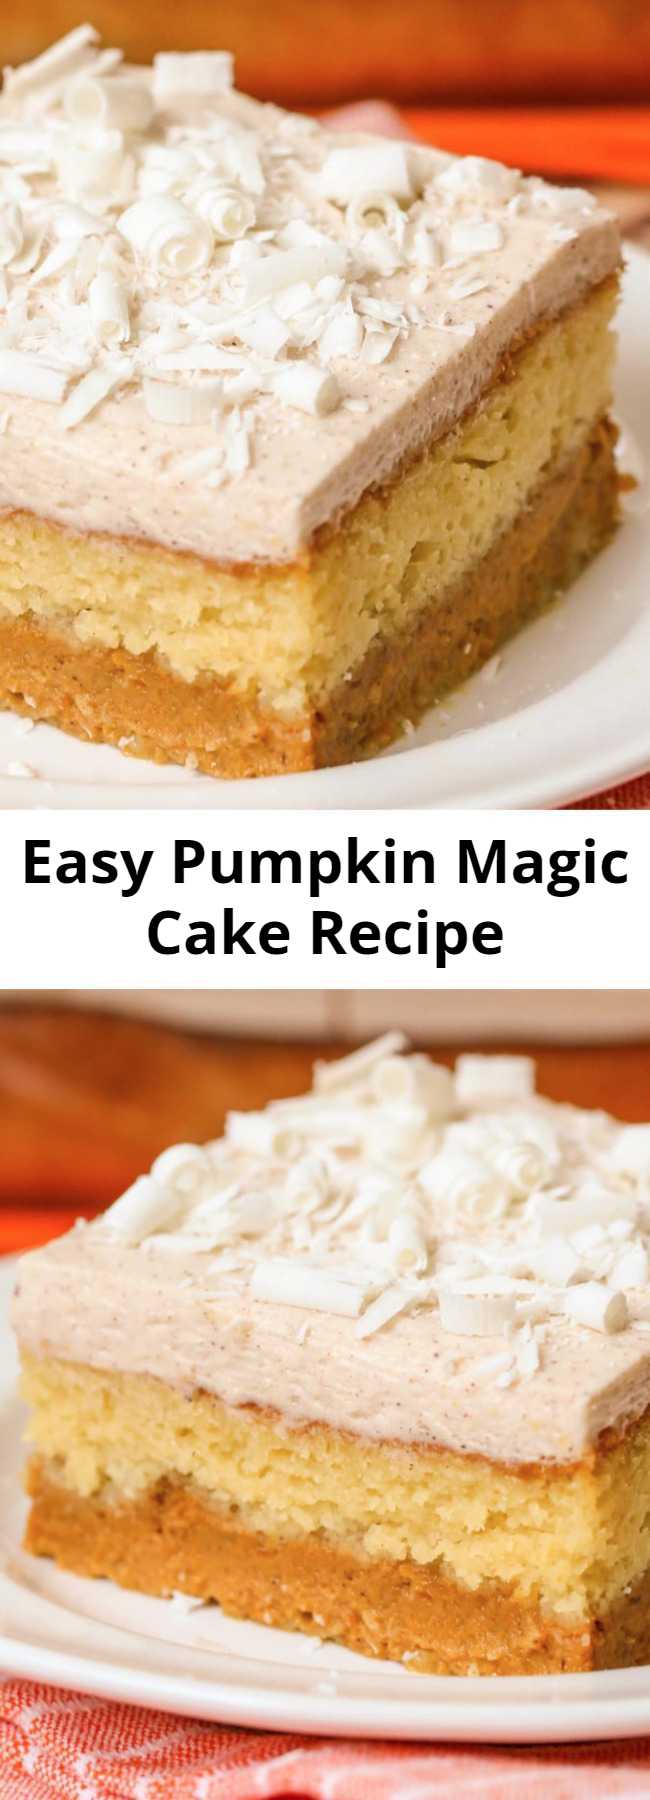 3 Layer Pumpkin Magic Cake Recipe - See For Yourself Why This 3 Layer Magic Pumpkin Cake Is So Magical! It’s Made Up Of A Creamy Pumpkin Puree Layer, A Layer Of Yellow Cake, And Lastly A White Chocolate Pumpkin Spice Frosting Topped With White Chocolate Shavings!!